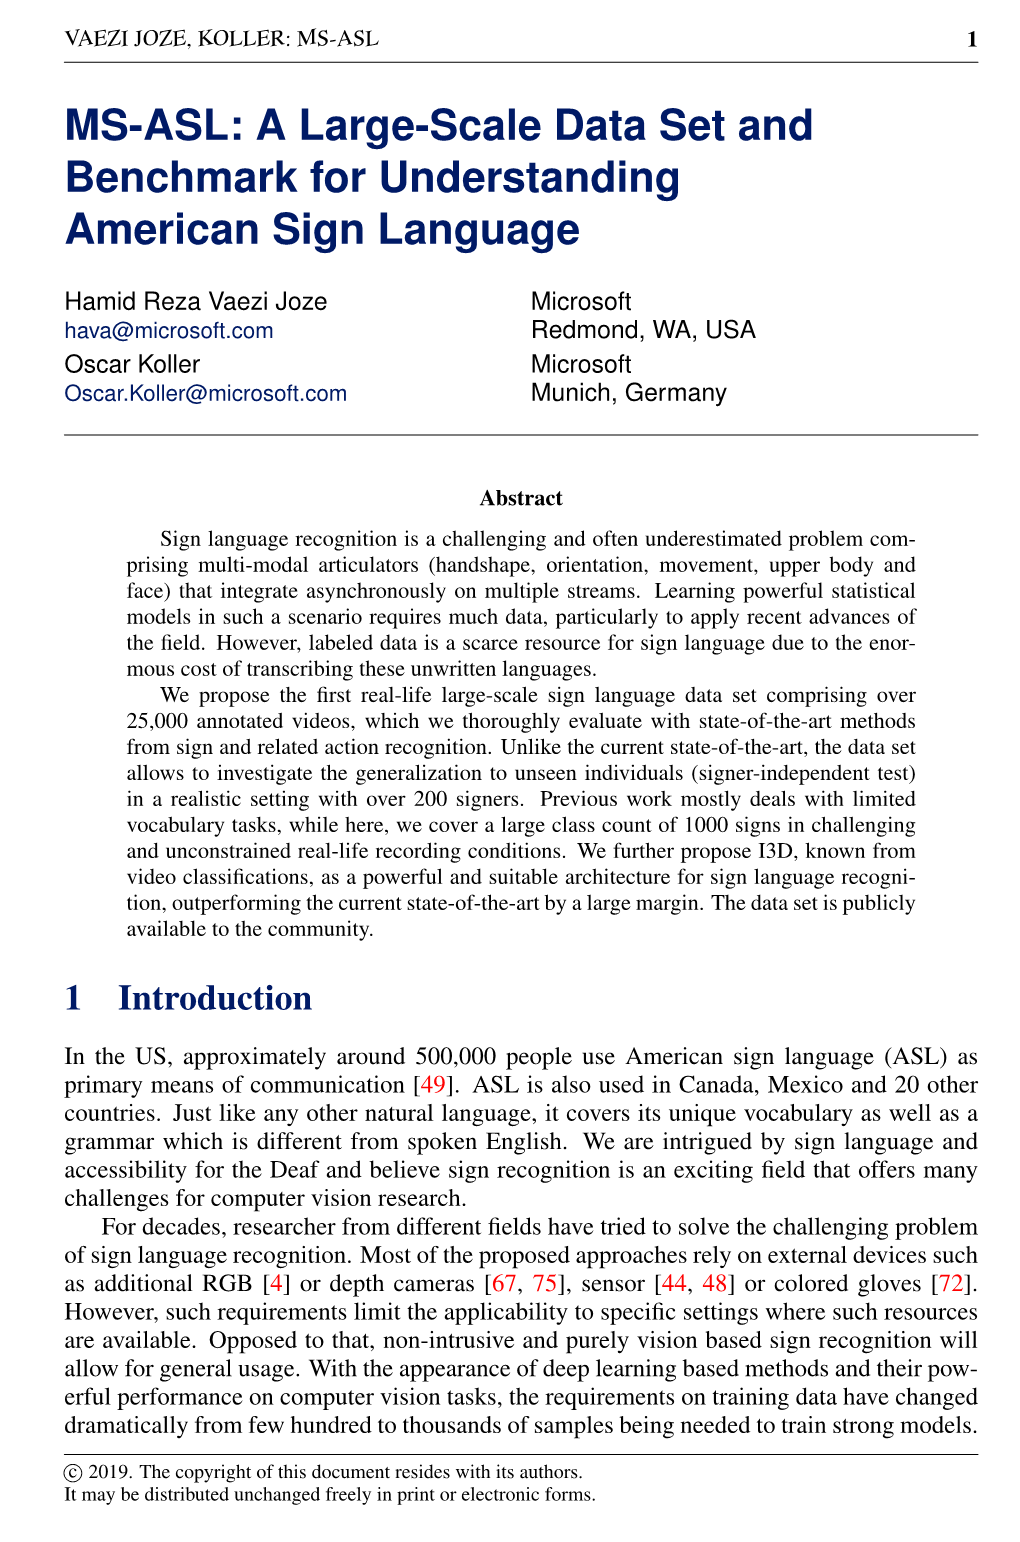 MS-ASL: a Large-Scale Data Set and Benchmark for Understanding American Sign Language